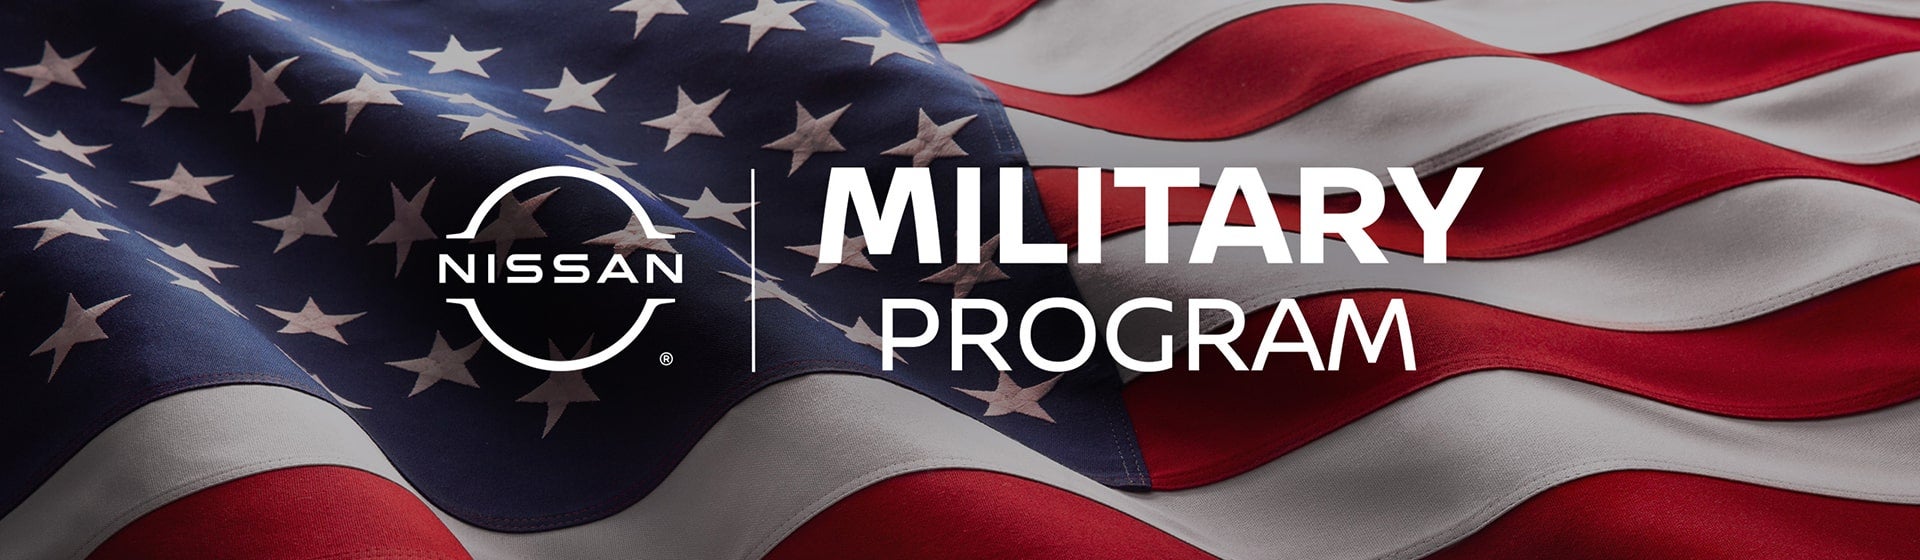 Nissan Military Discount | Bedford Nissan in Bedford OH